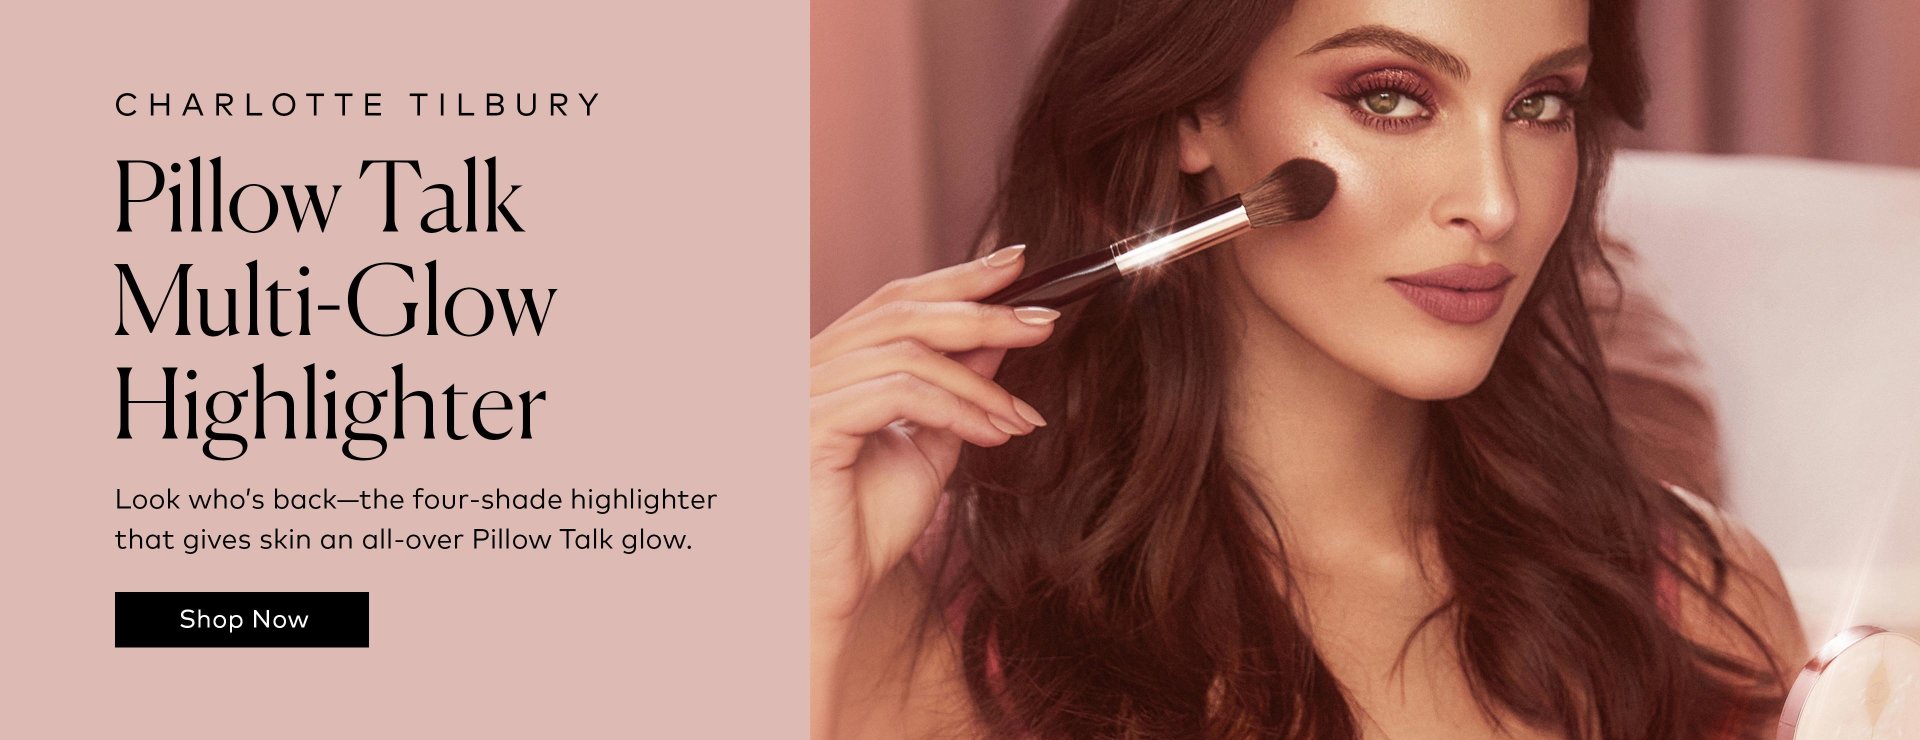 The Charlotte Tilbury Pillow Talk Multi-Glow Highlighter is back in stock at Beautylish.com. Shop now!